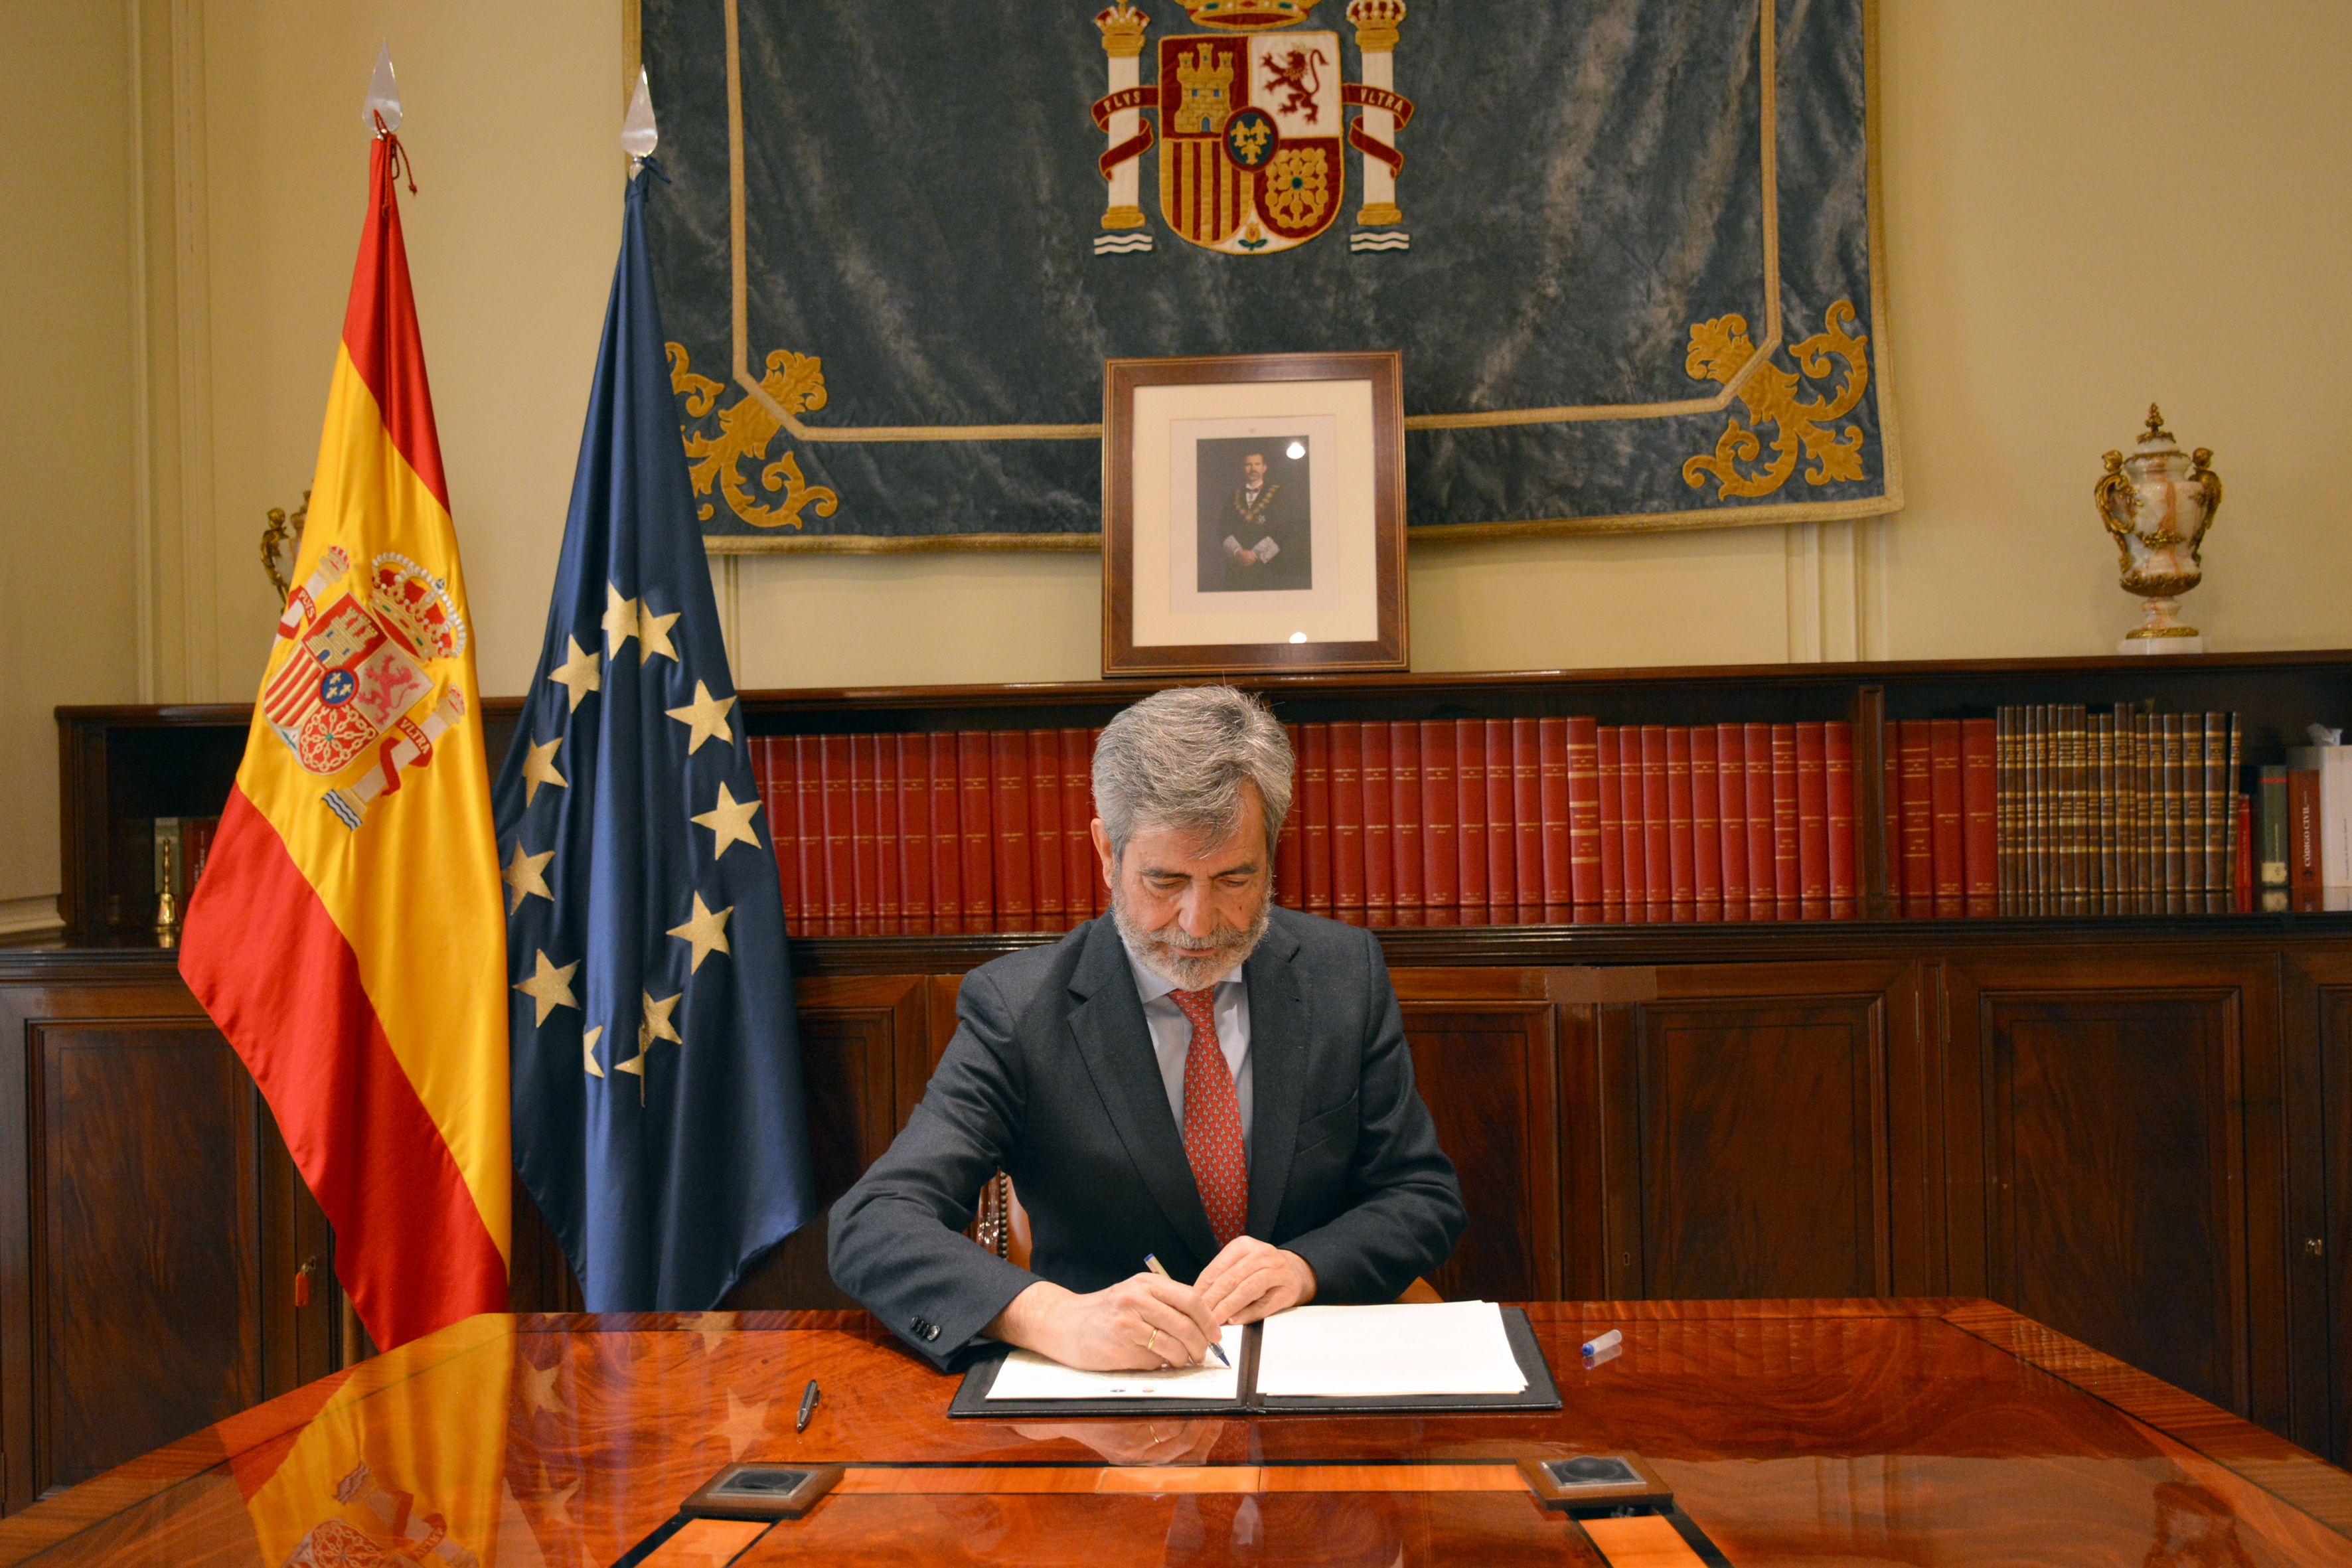 President of the Supreme Court and President of the General Council of the Judiciary Carlos Lesmes